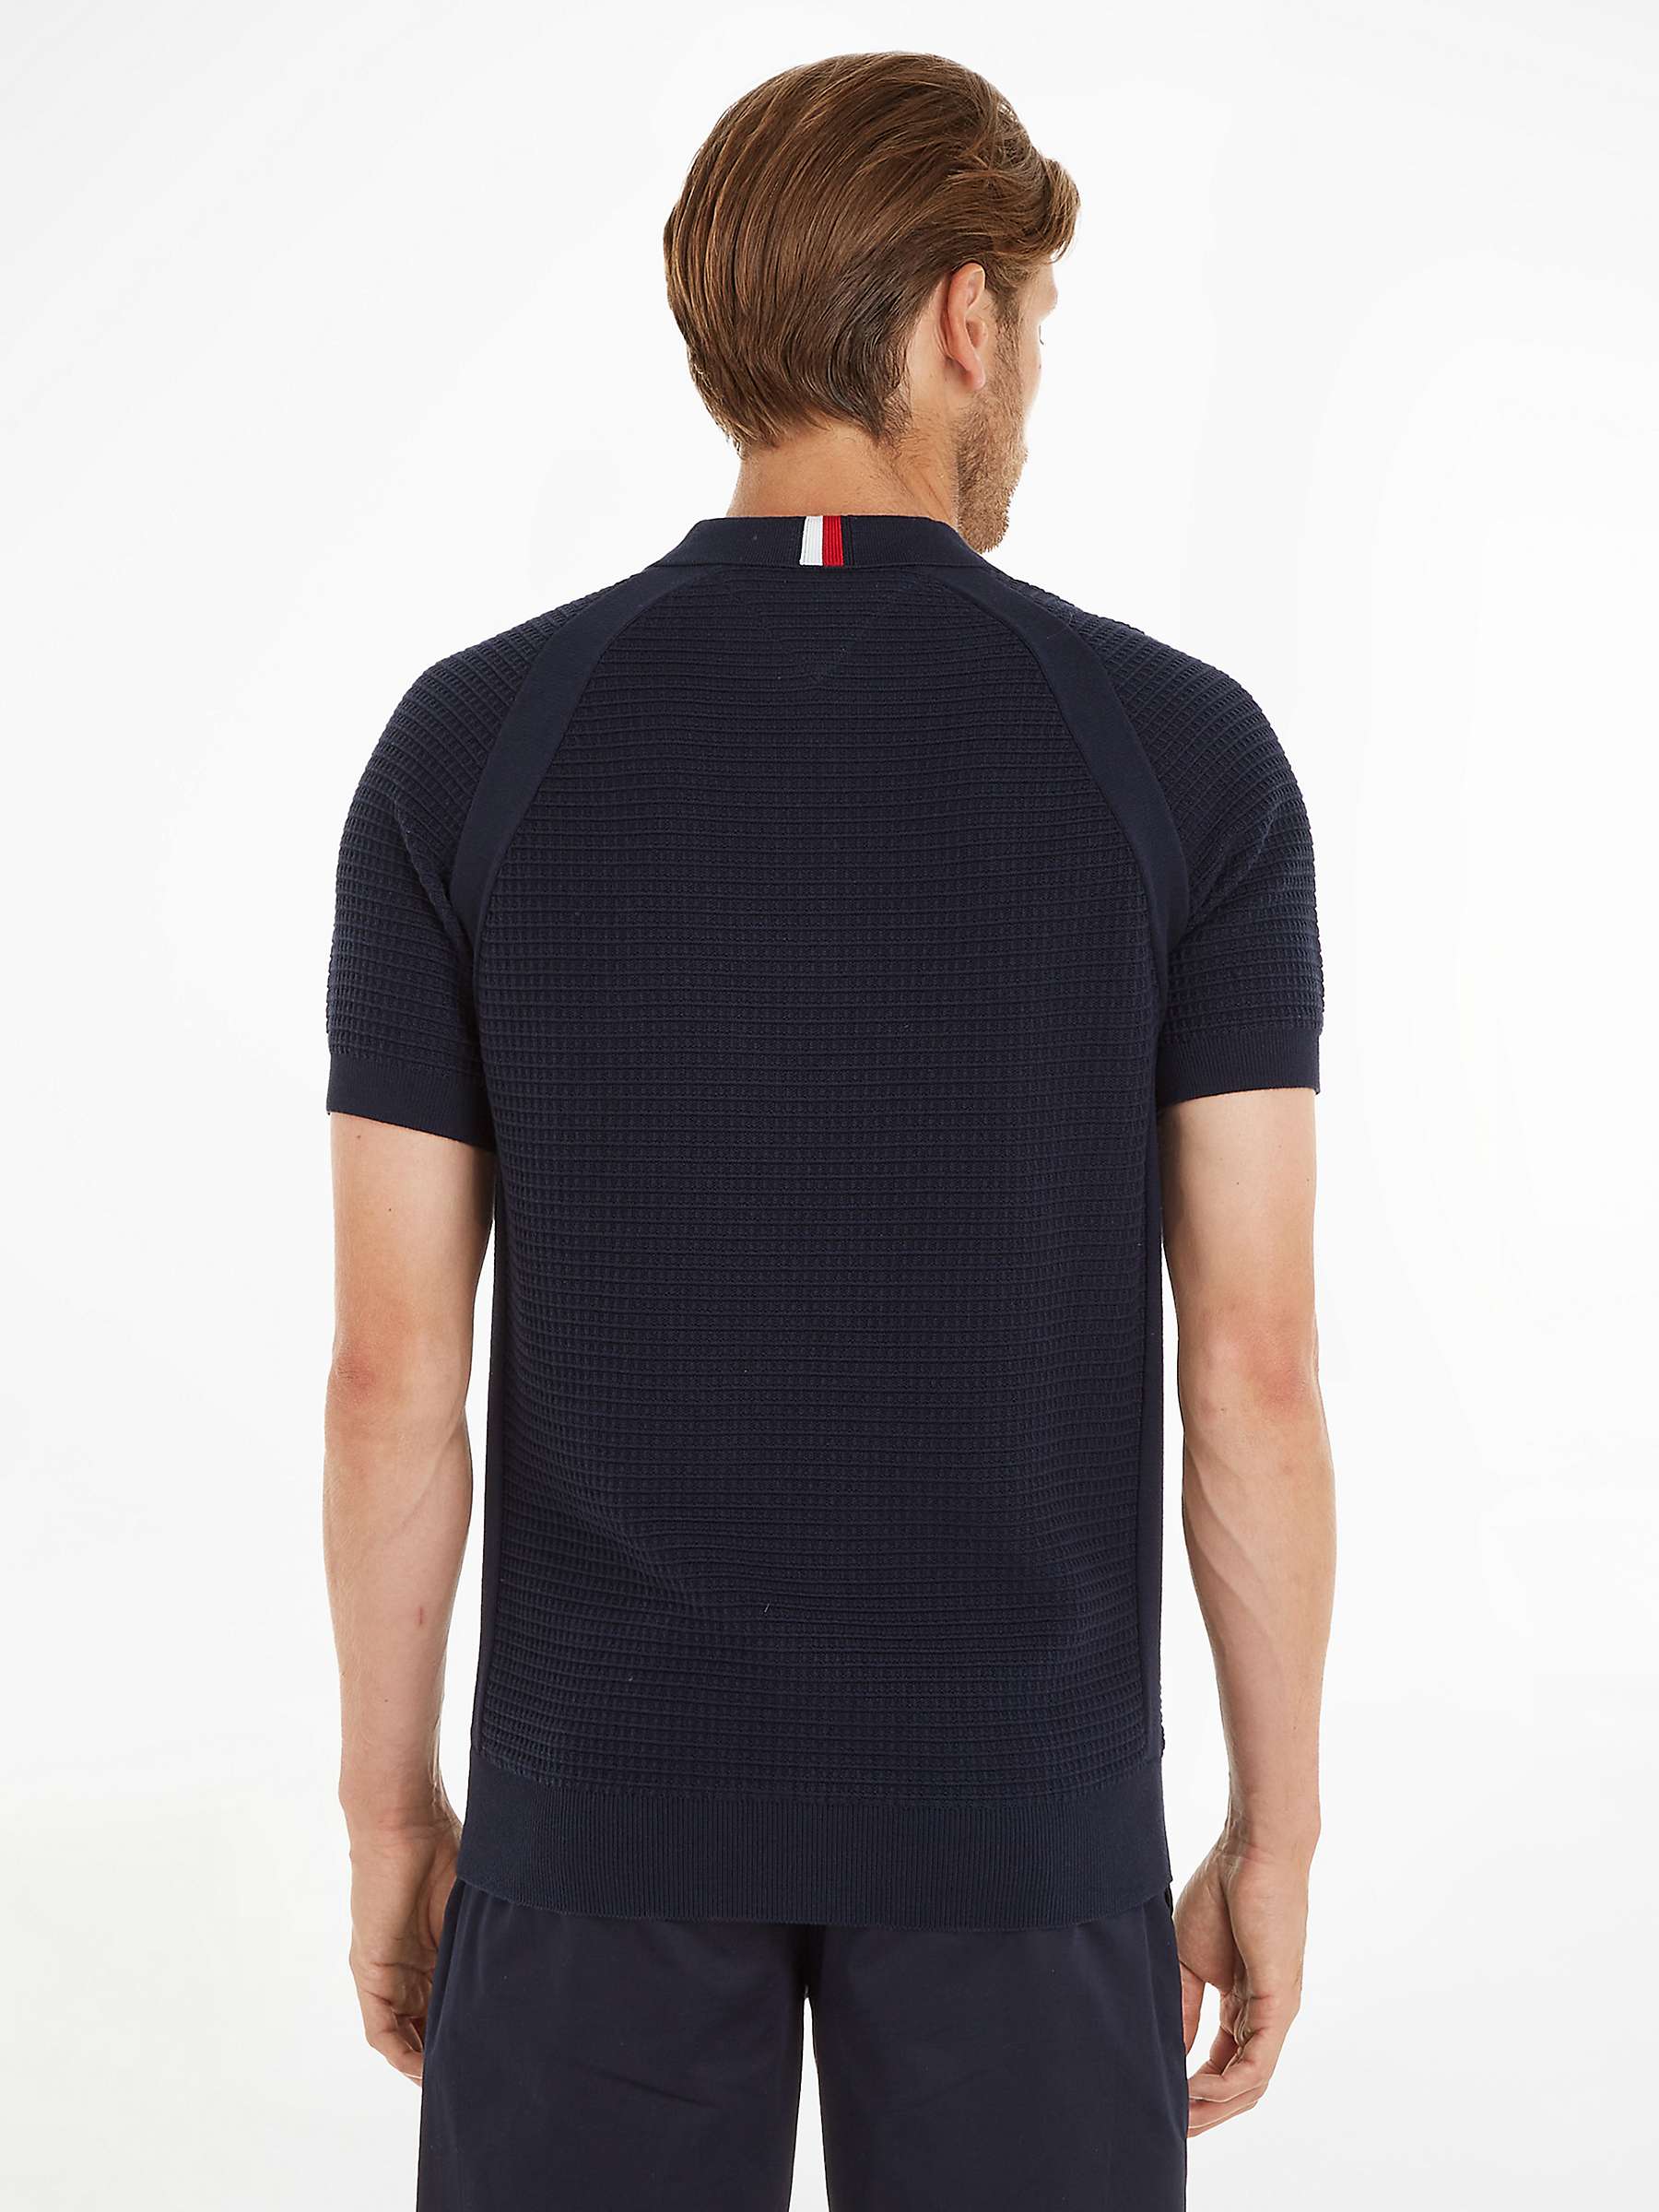 Buy Tommy Hilfiger Textured Organic Cotton Spring Polo Shirt Online at johnlewis.com